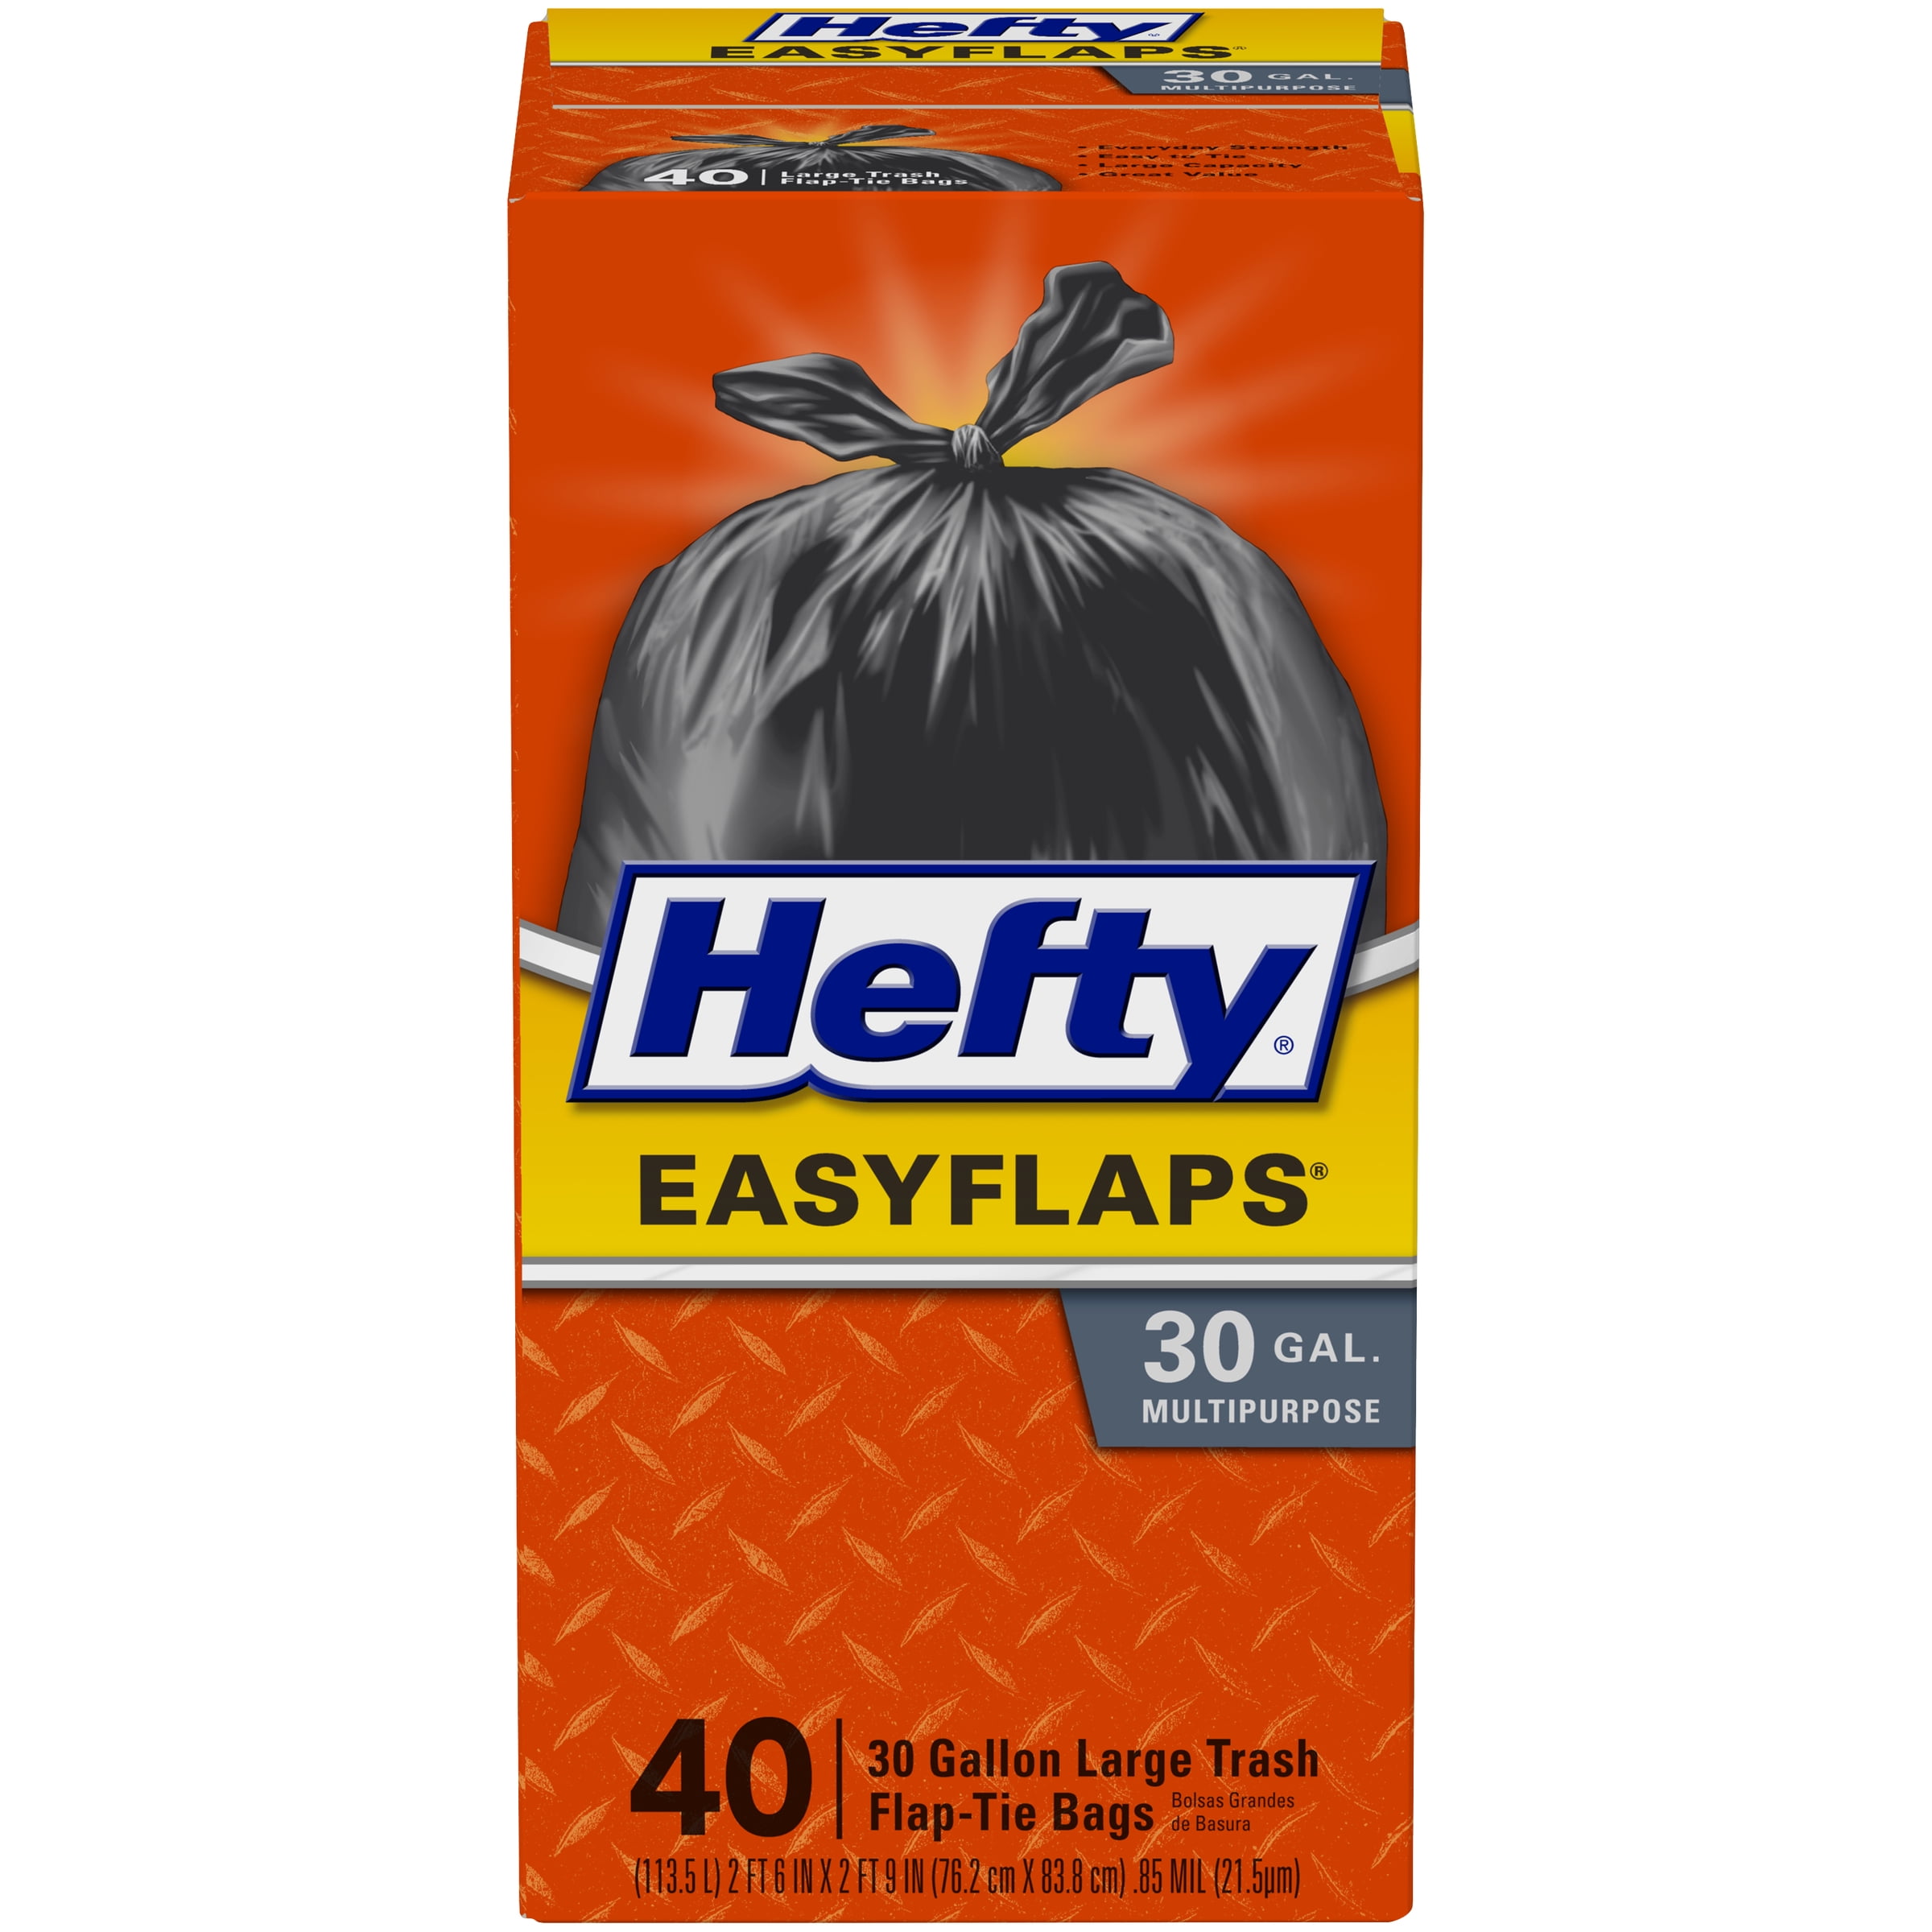 Hefty E20119 Unscented Small Trash Bag w/Flap Tie Closure, 4-Gal, 30-C –  Toolbox Supply